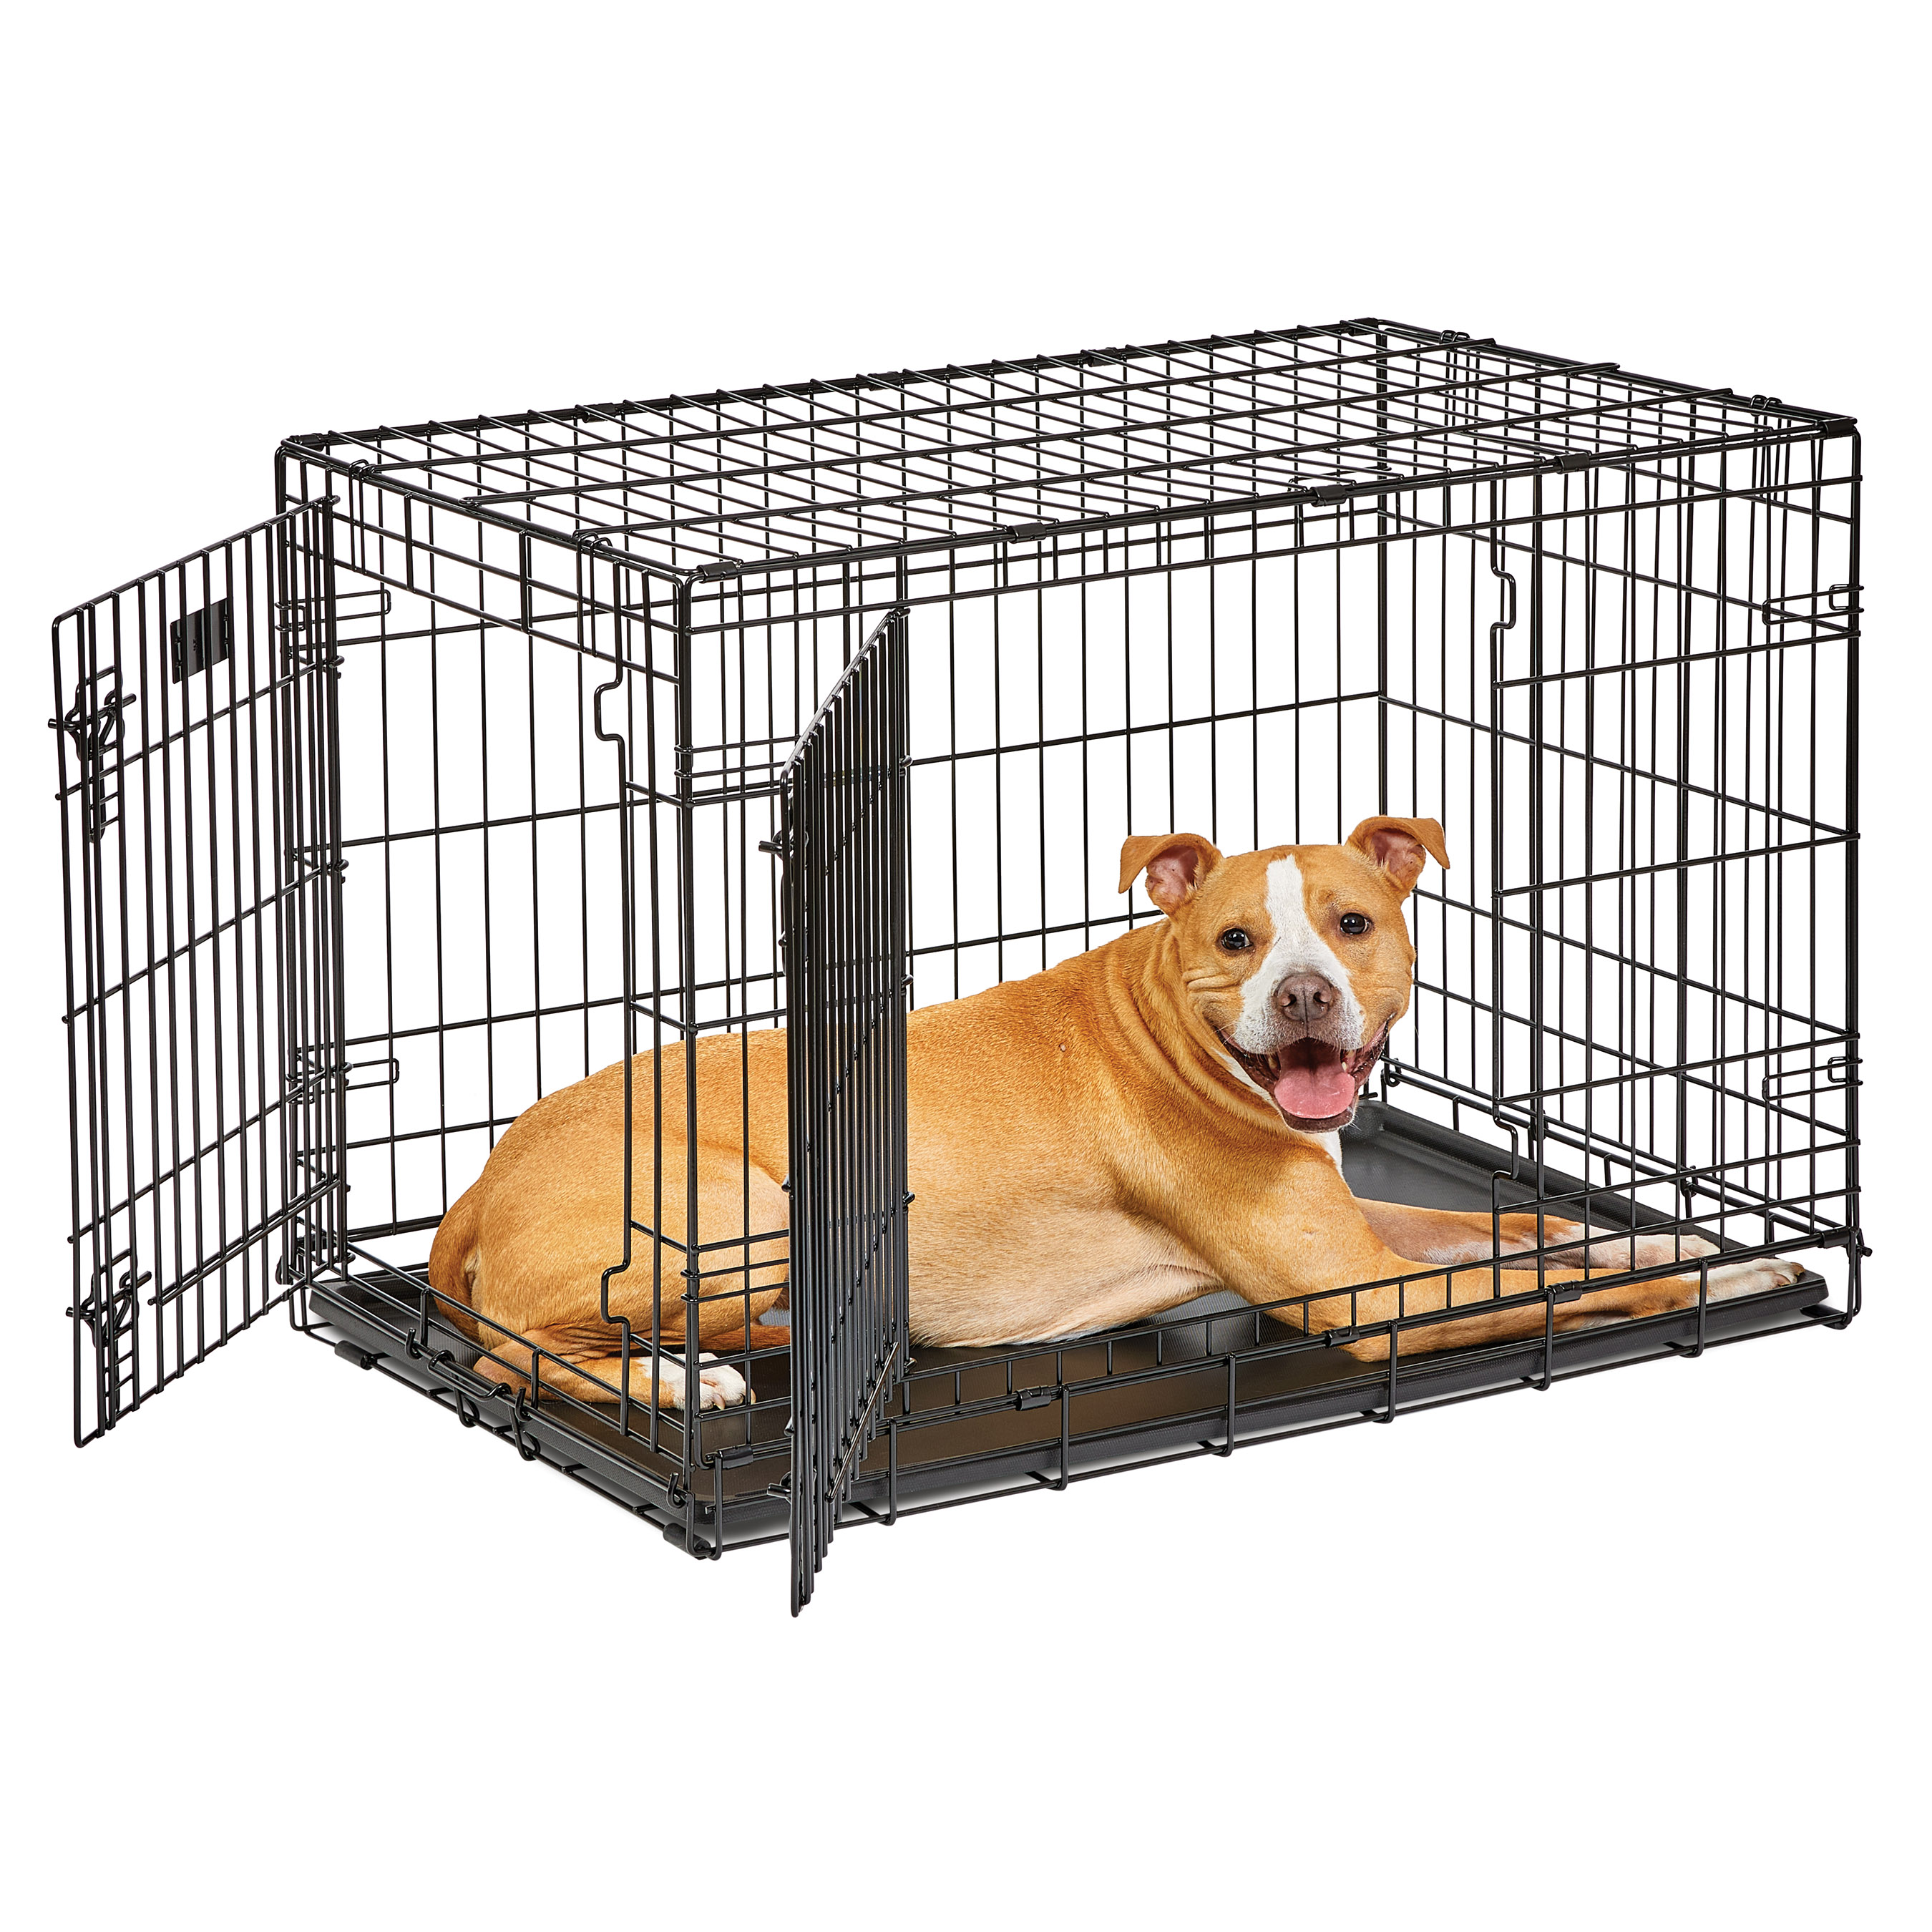 MidWest Homes for Pets Medium Dog Crate Newly Enhanced LifeStages 36' Double Door Folding Metal Dog Crate with Divider Panel, Floor Protecting Feet & Dog Pan, 1636DDU, 37.26L x 24.76W x 26.31H Inches - image 2 of 10